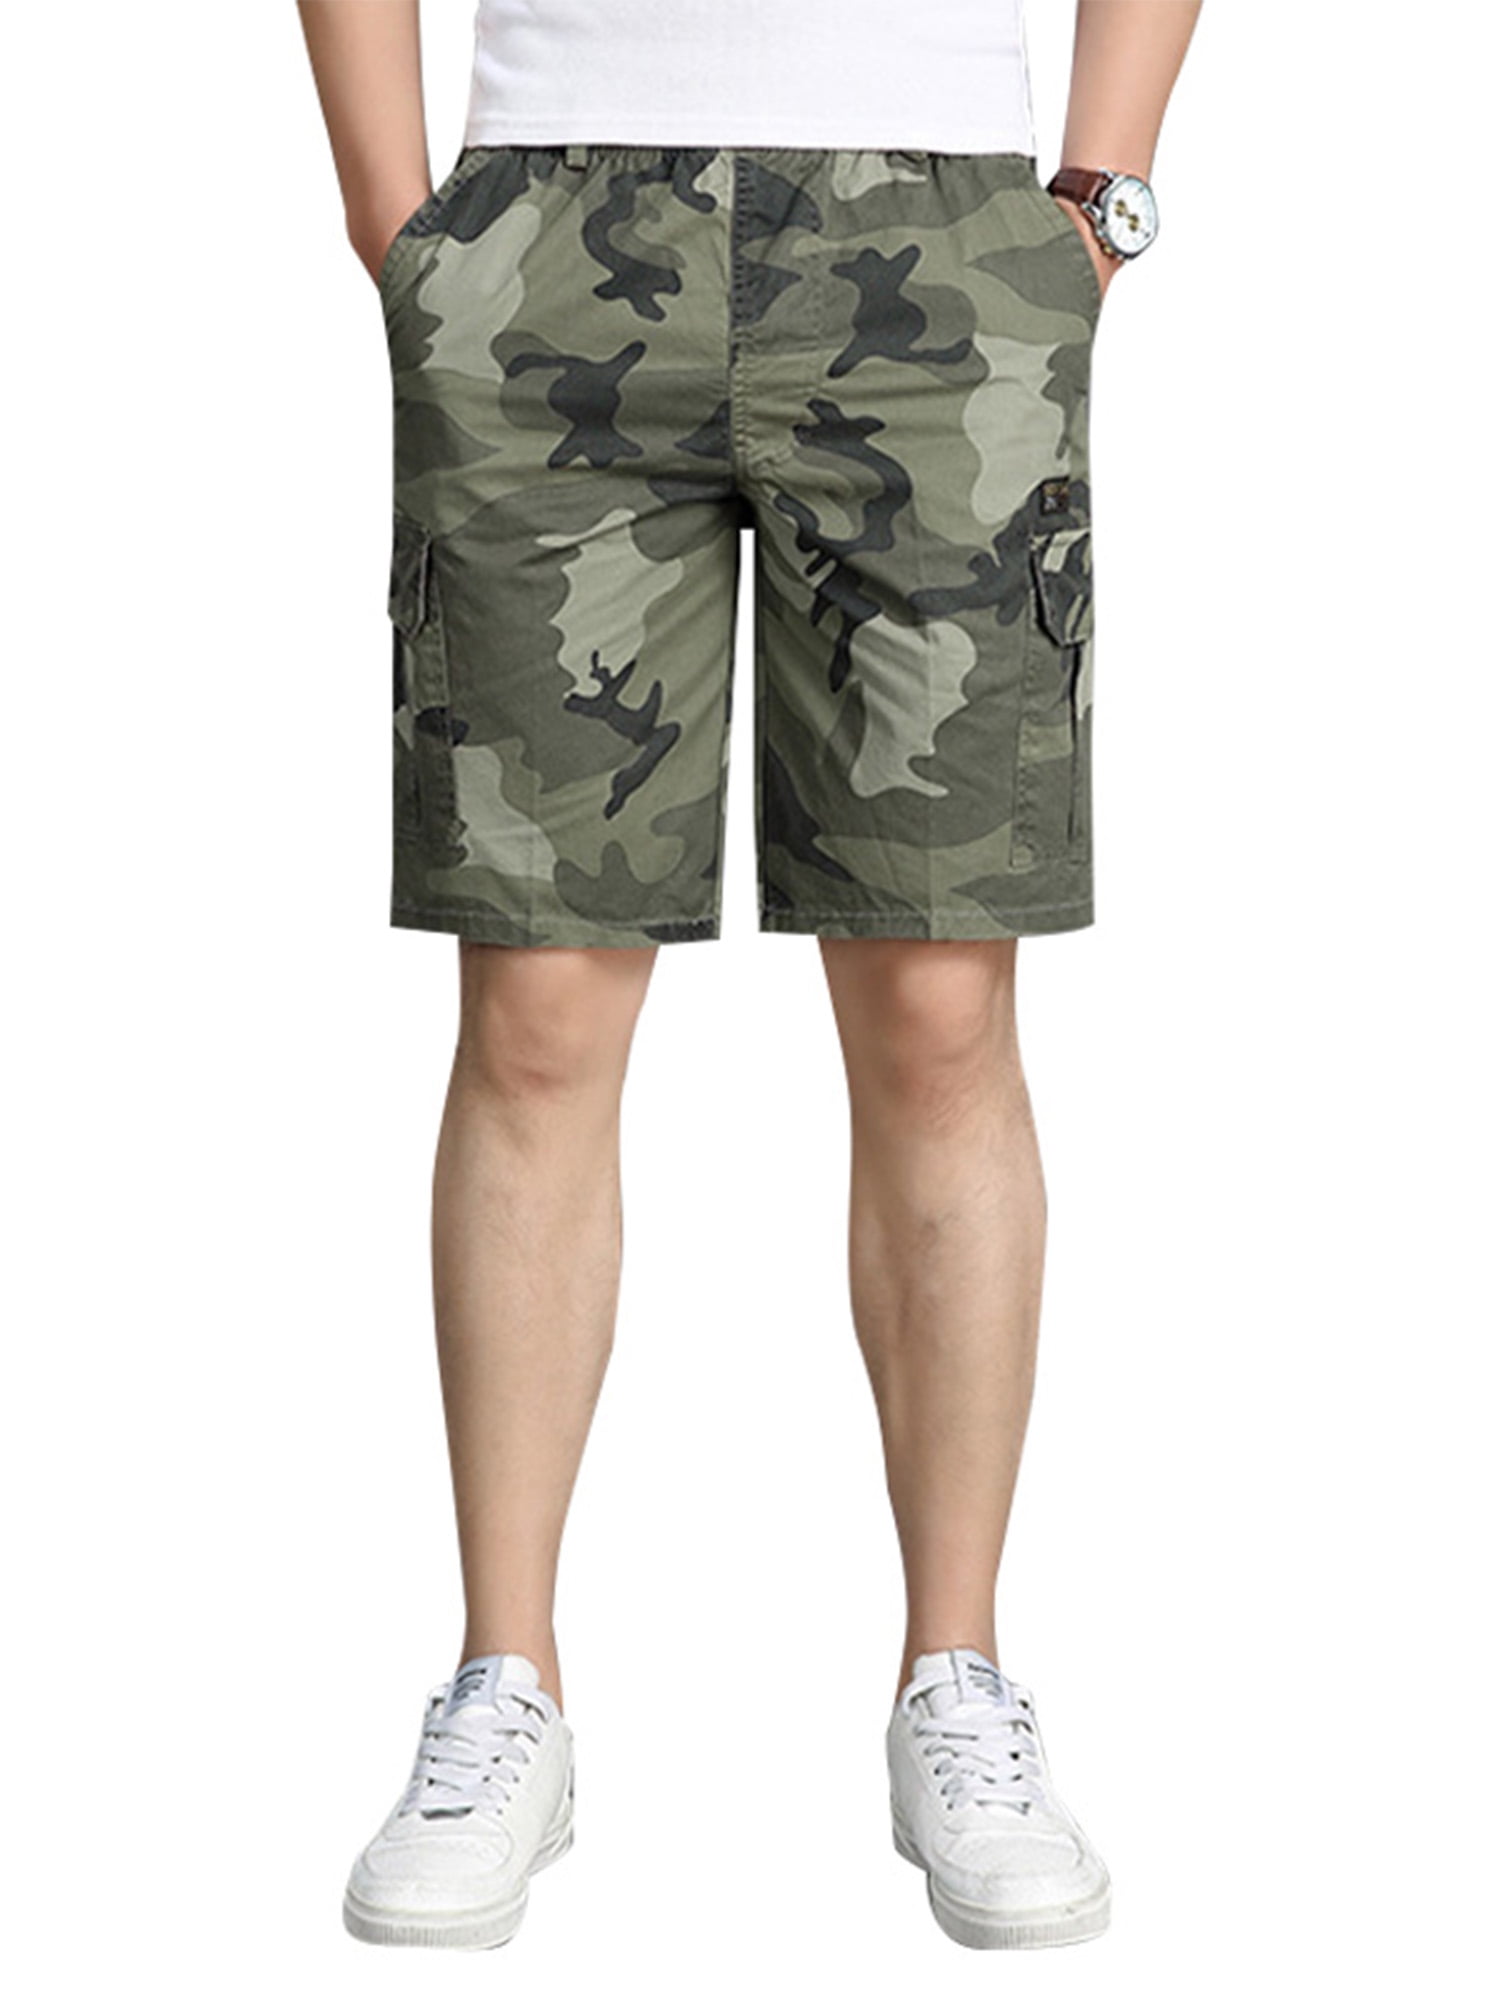 New Mens Army Camouflage Cargo Elasticated Shorts Combat Half Pants Bottoms Camo 